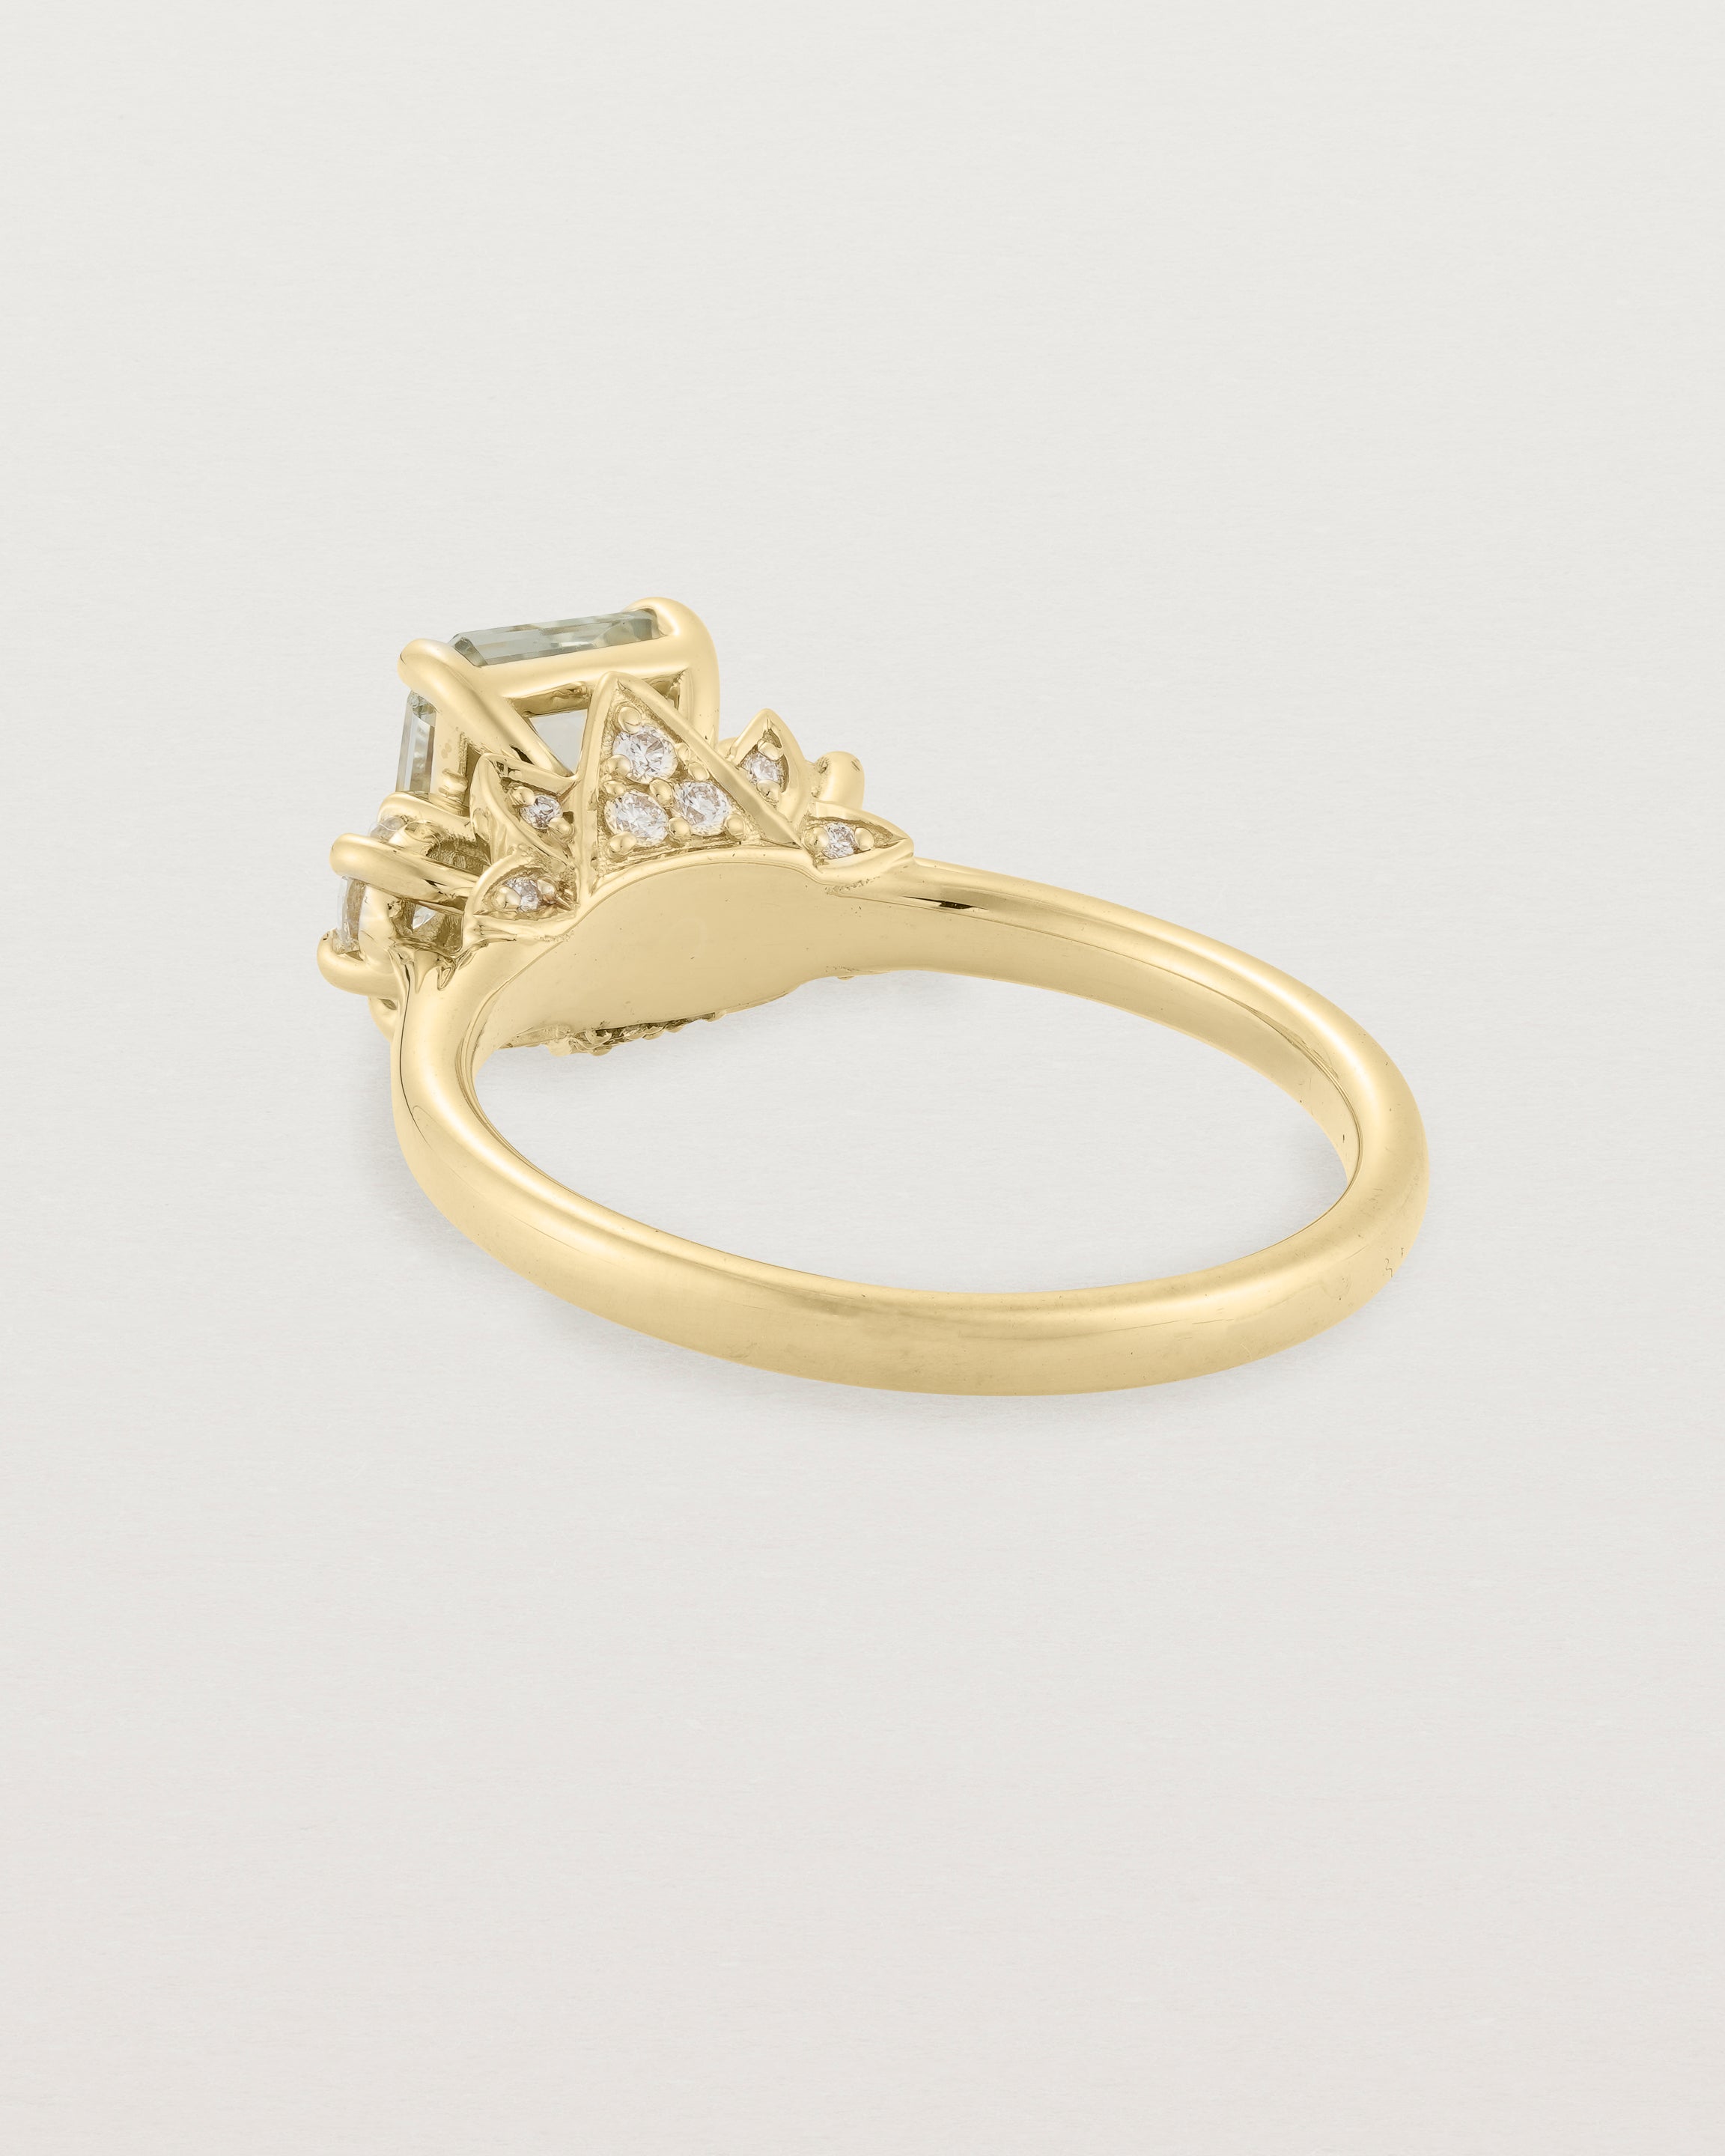 Back view of the Laurel Emerald Trio Ring | Green Amethyst | Yellow Gold.